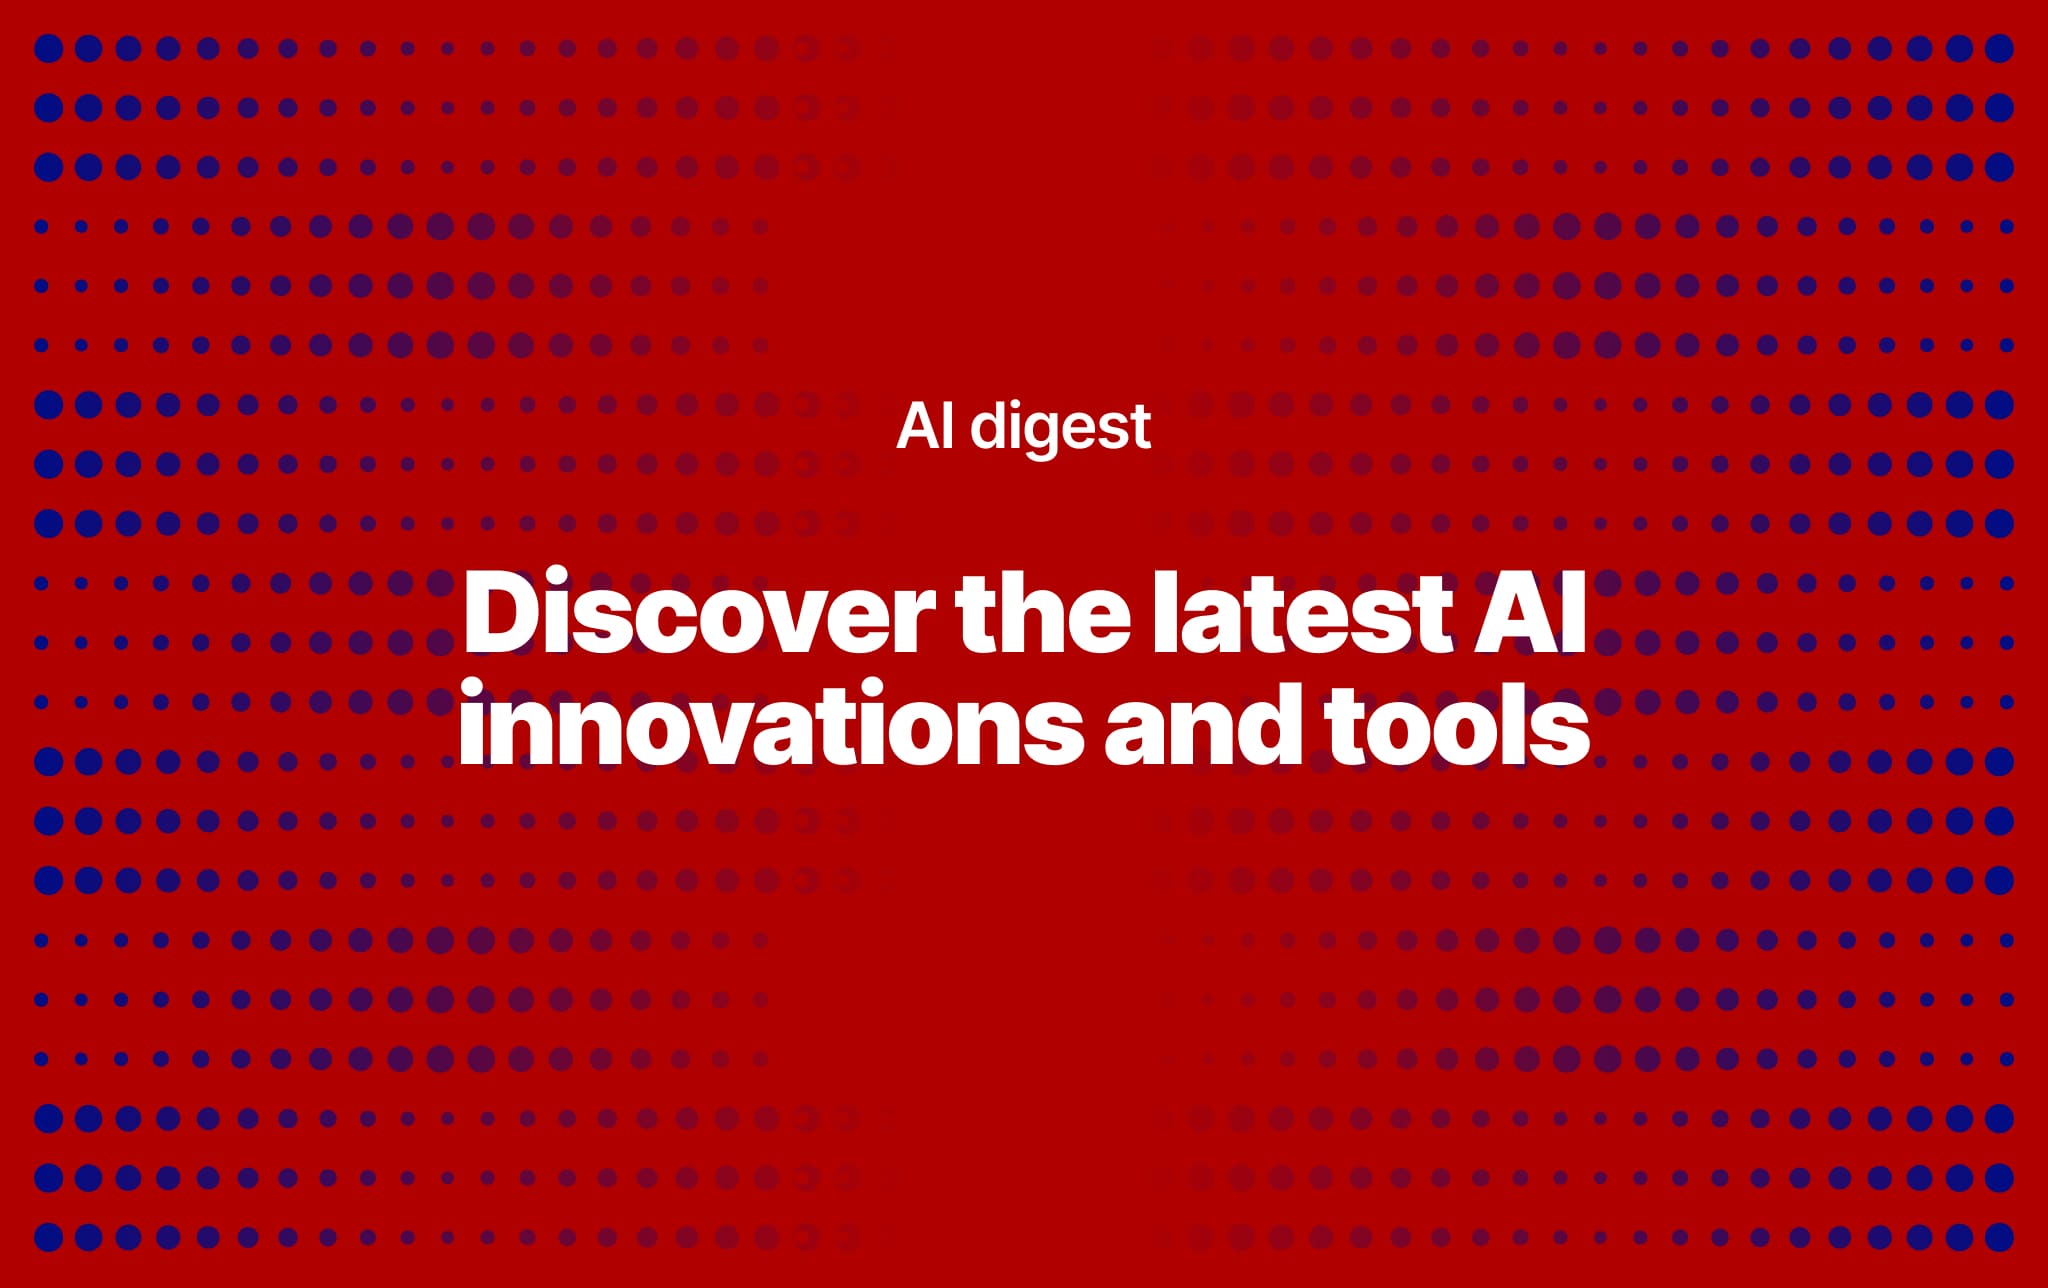 Discover the latest AI innovations and tools